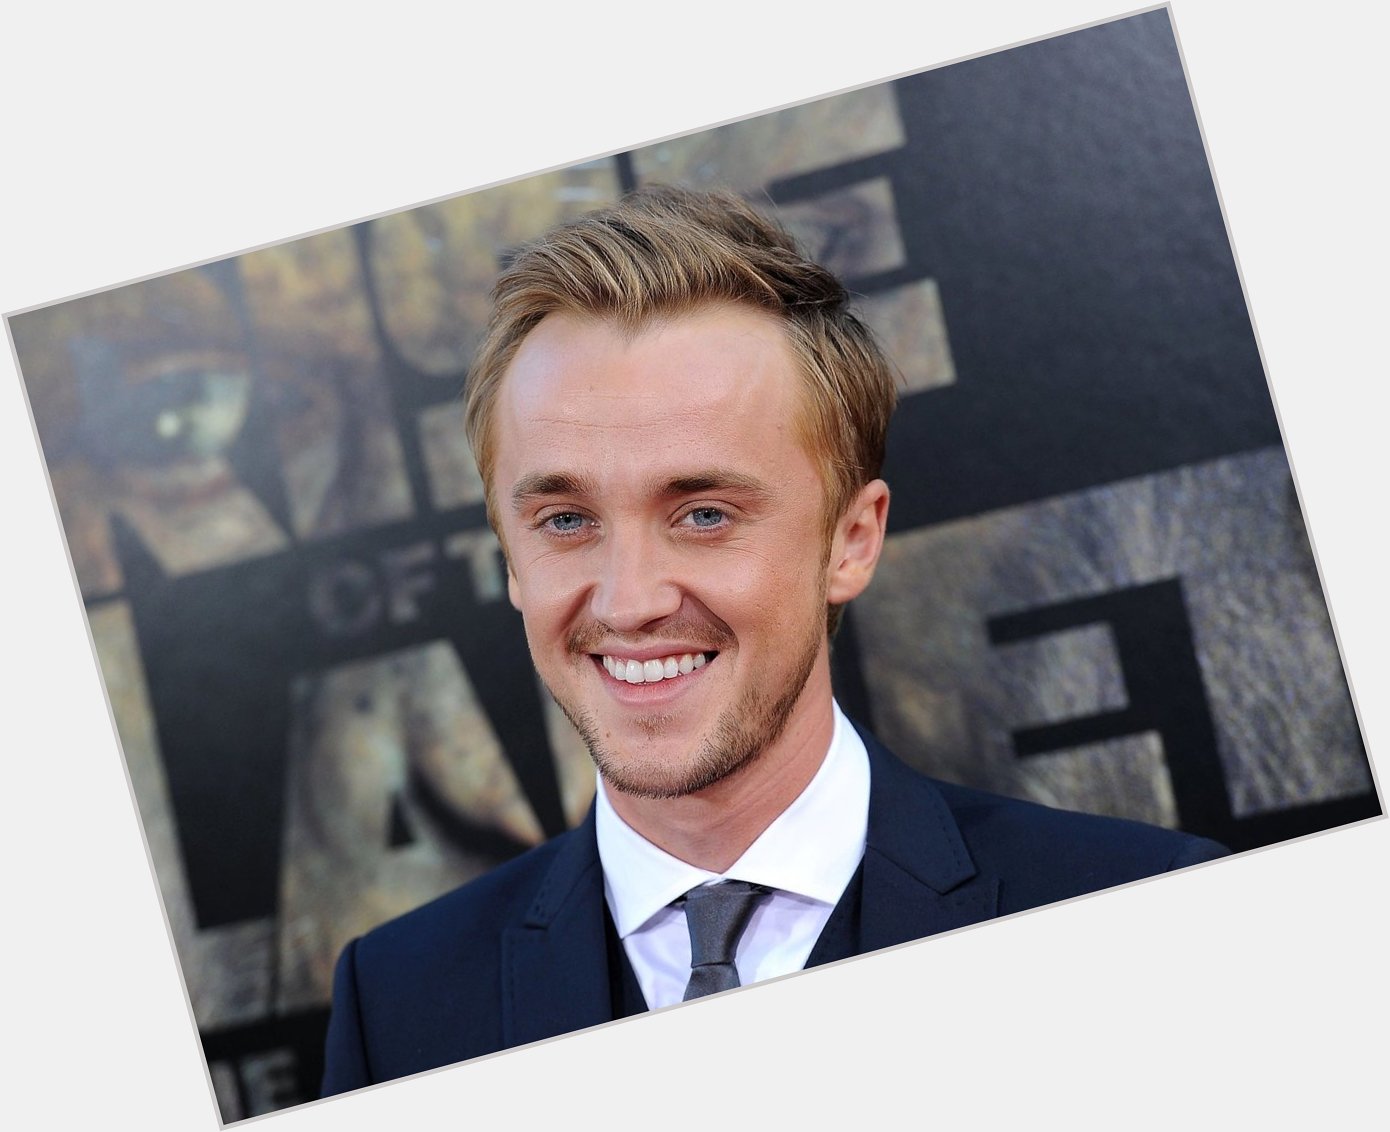 HAPPY BIRTHDAY TO THE ONE AND ONLY TOM FELTON !!!! 